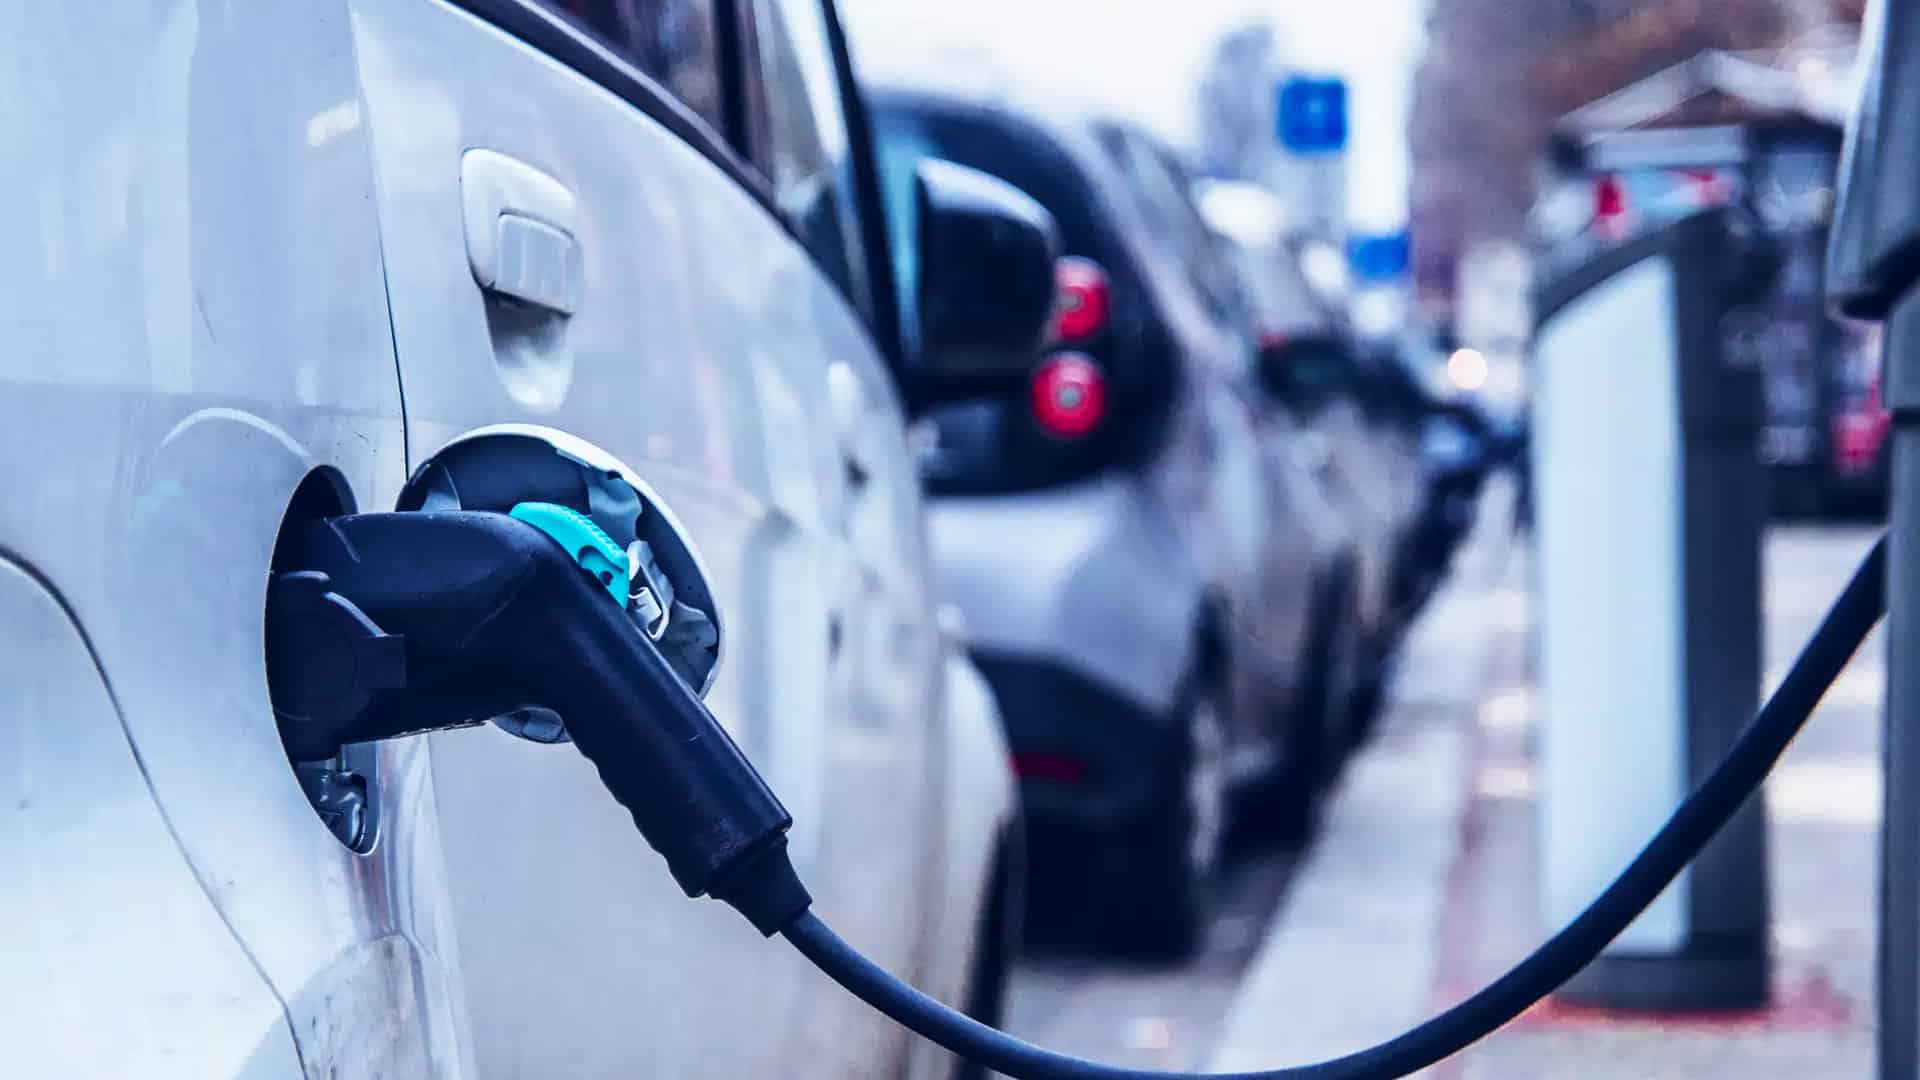 TN working on improving EV charging infrastructure: Industries Minister